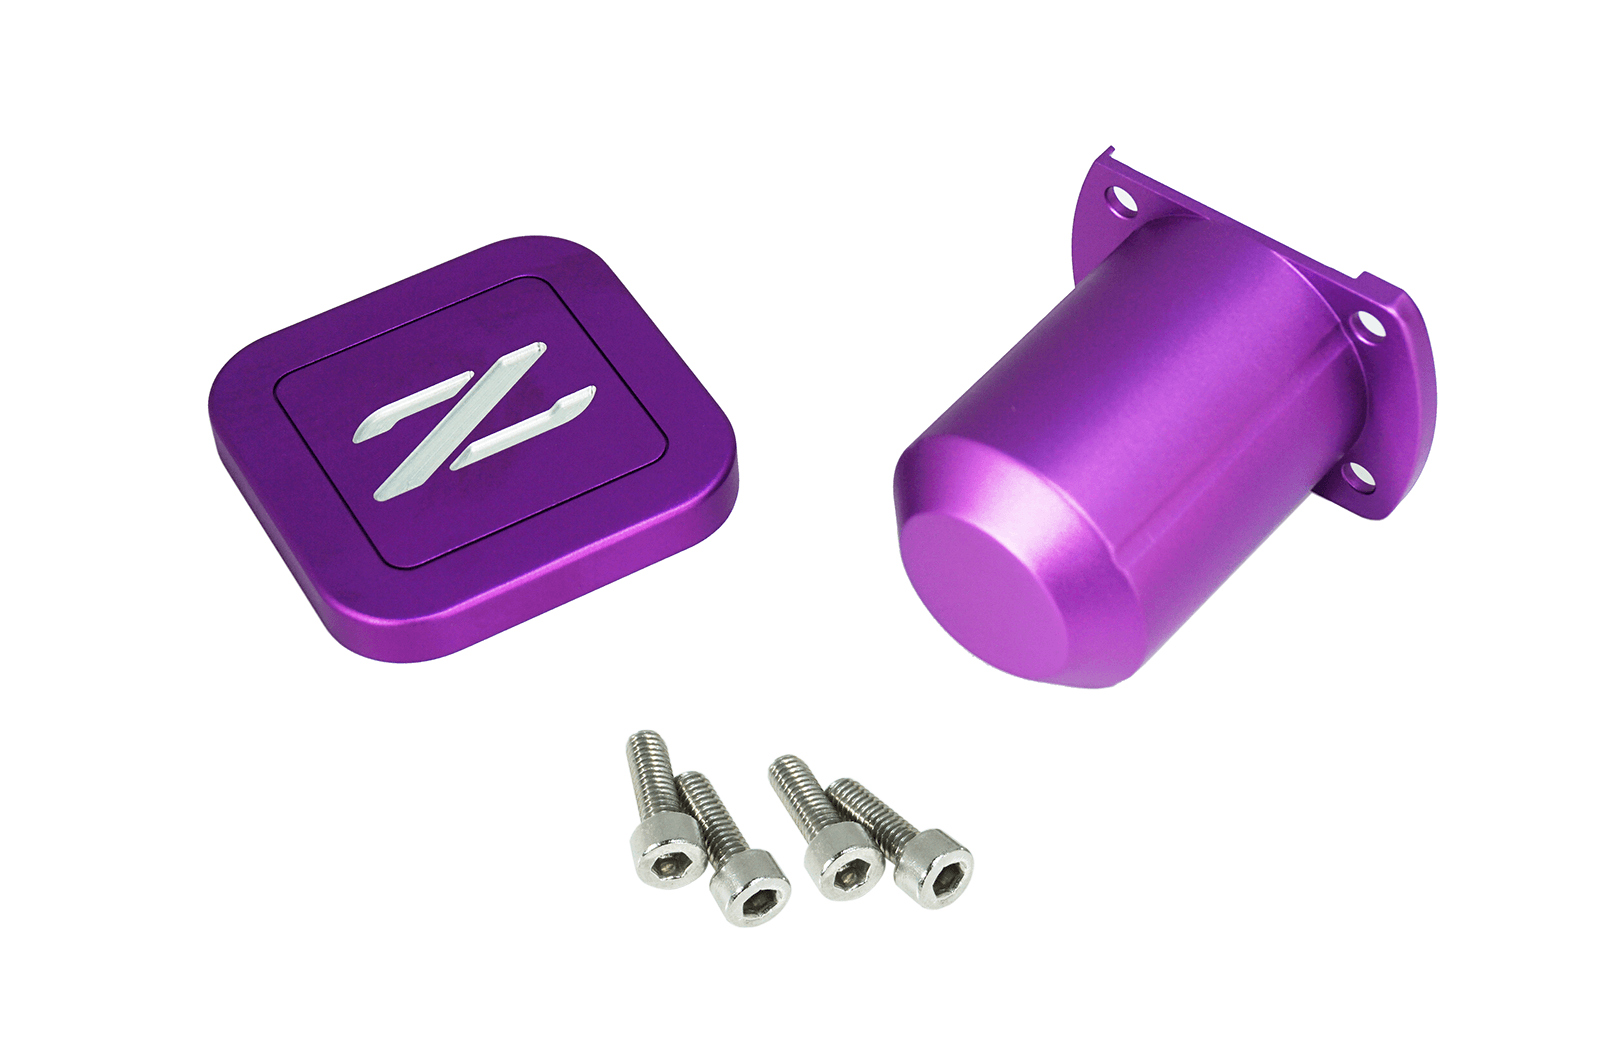 ZSPEC Billet Cruise Control Caps for Nissan Z32 300zx, 1990-96 Billet Aluminum Dress Up Bolts Fasteners Washers Red Blue Purple Gold Burned Black Keywords Nissan Infiniti Sports Car Coupe Engine Bay Dress Up Bolts Washers Performance Upgrade